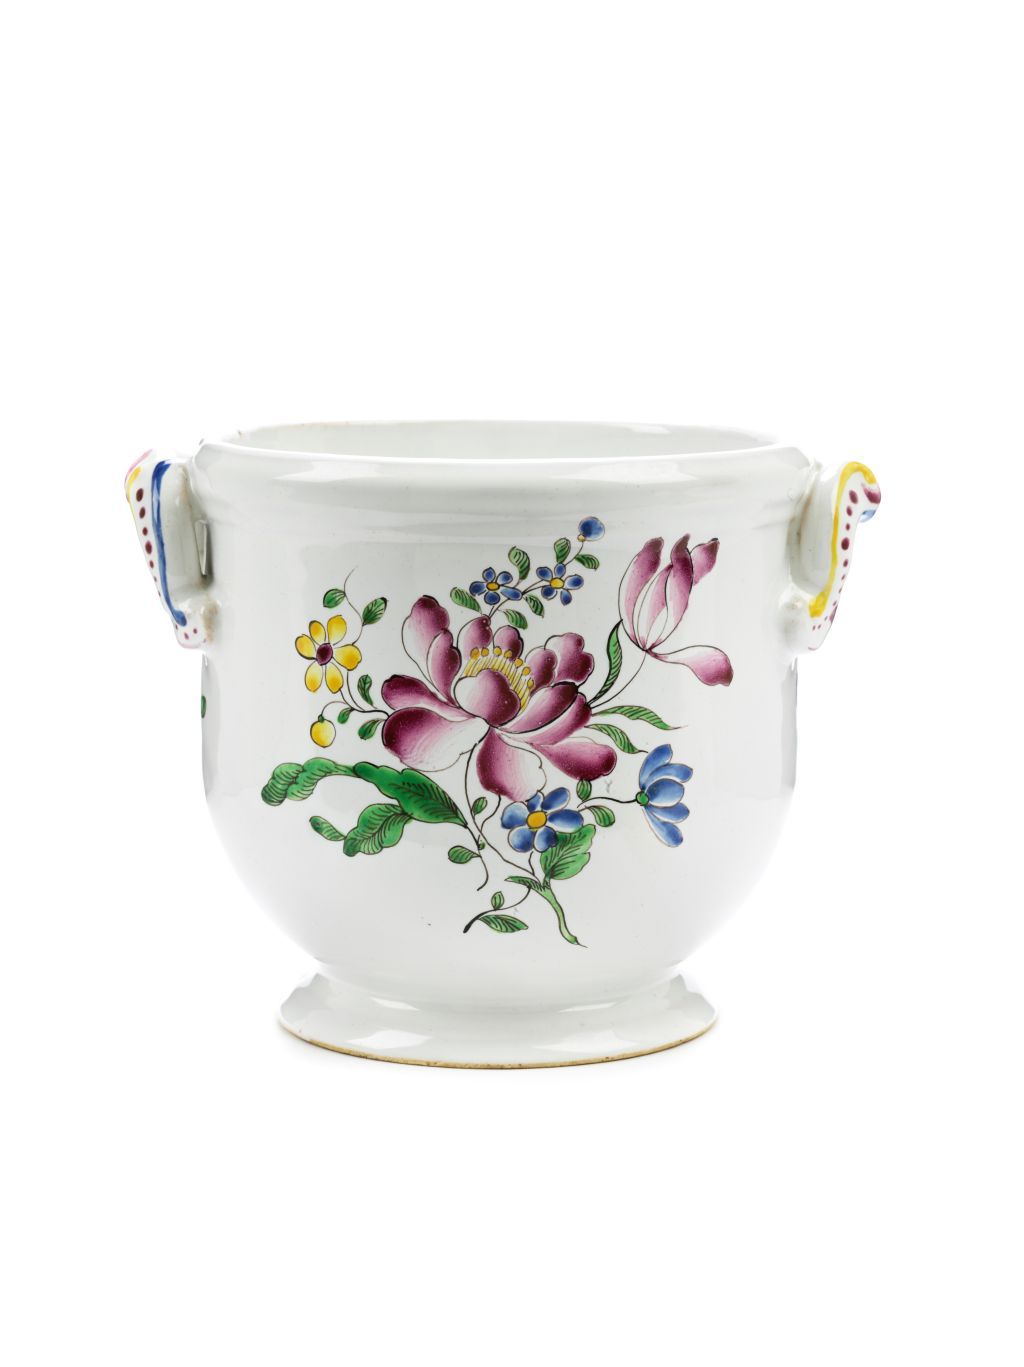 strasbourg-faience-cachepot-hannong-18th-century